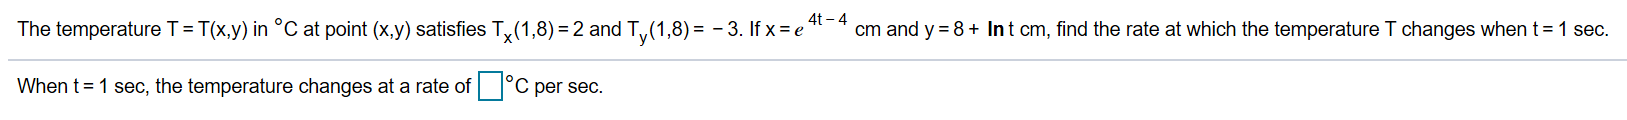 4t-4
cm and y 8+ Int cm, find the rate at which the temperature T changes when t
The temperature T= T(x.y) in °C at point (x.y) satisfies T,x(1,8) 2 and Ty(1,8)= -3. If x e'
1 sec.
C per sec.
When t 1 sec, the temperature changes at a rate of
